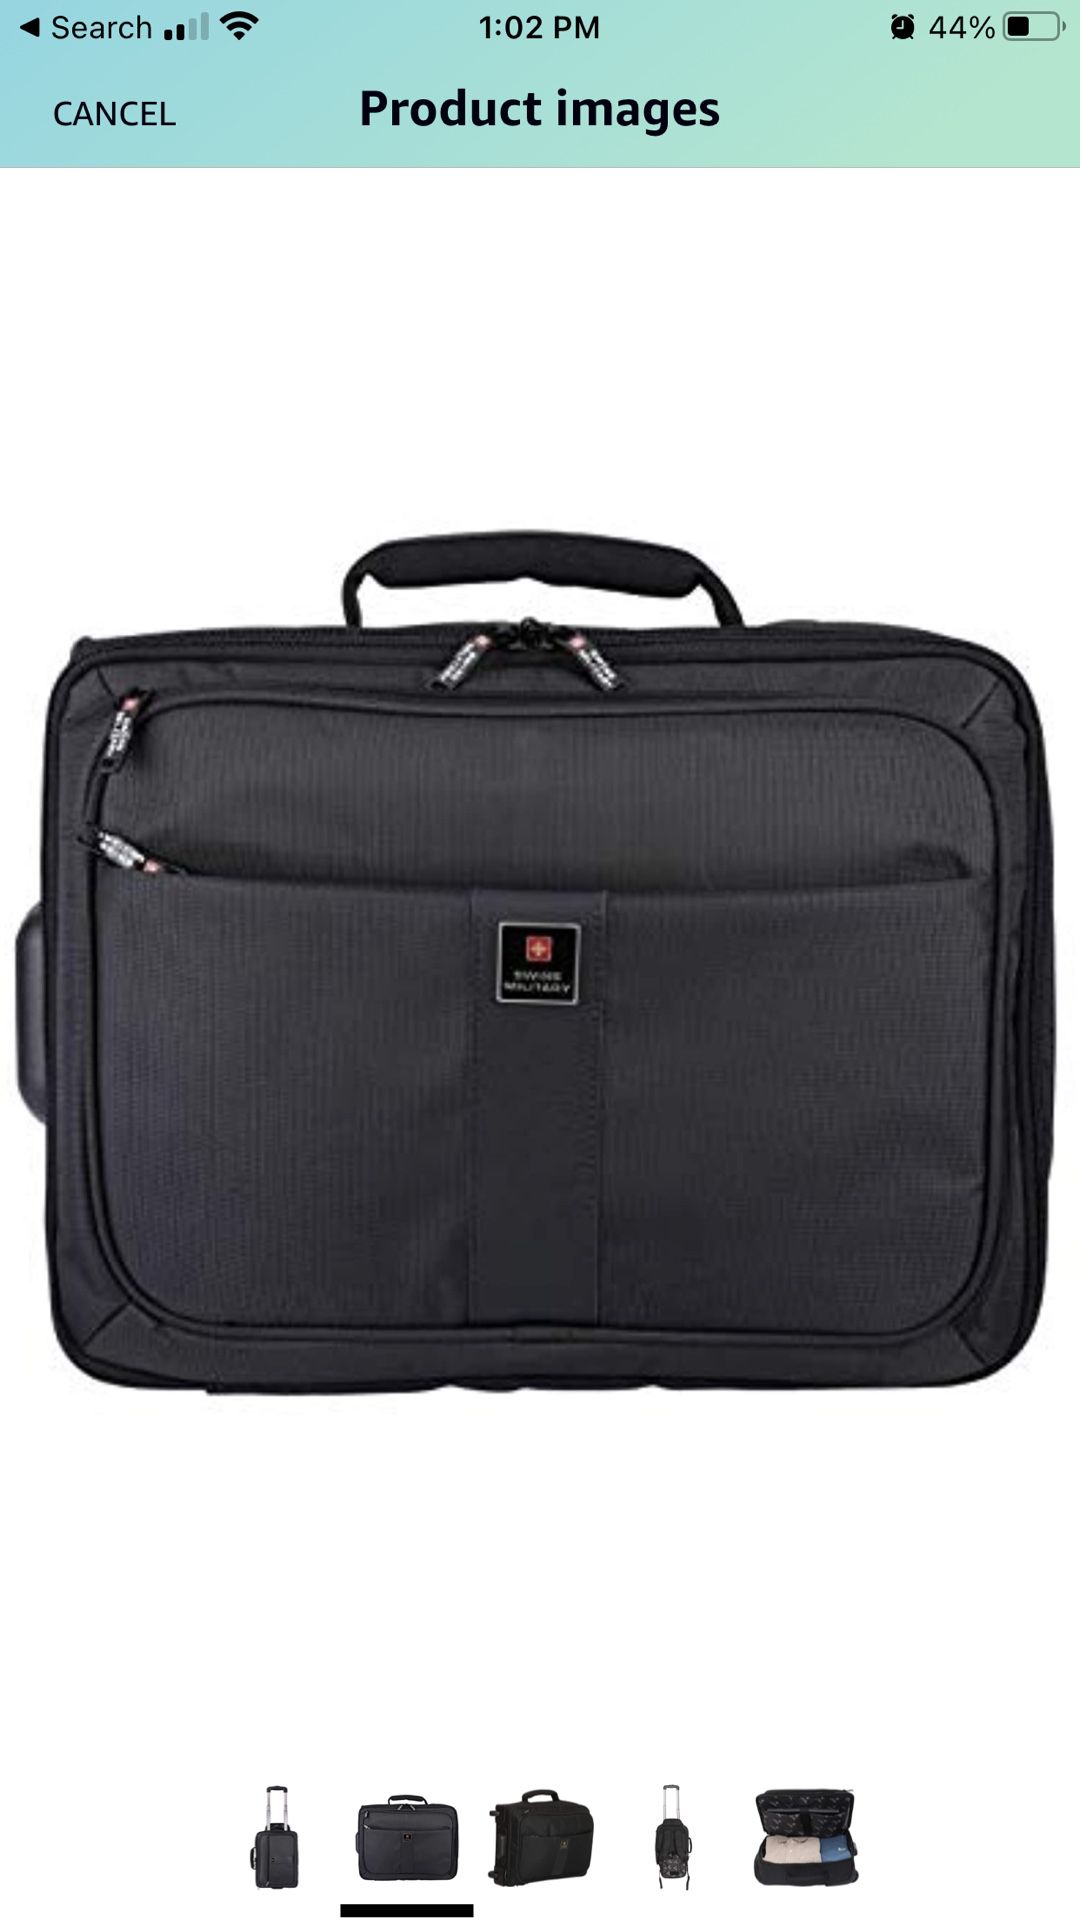 Swiss Military Laptop Trolley Briefcase Cum Backpack